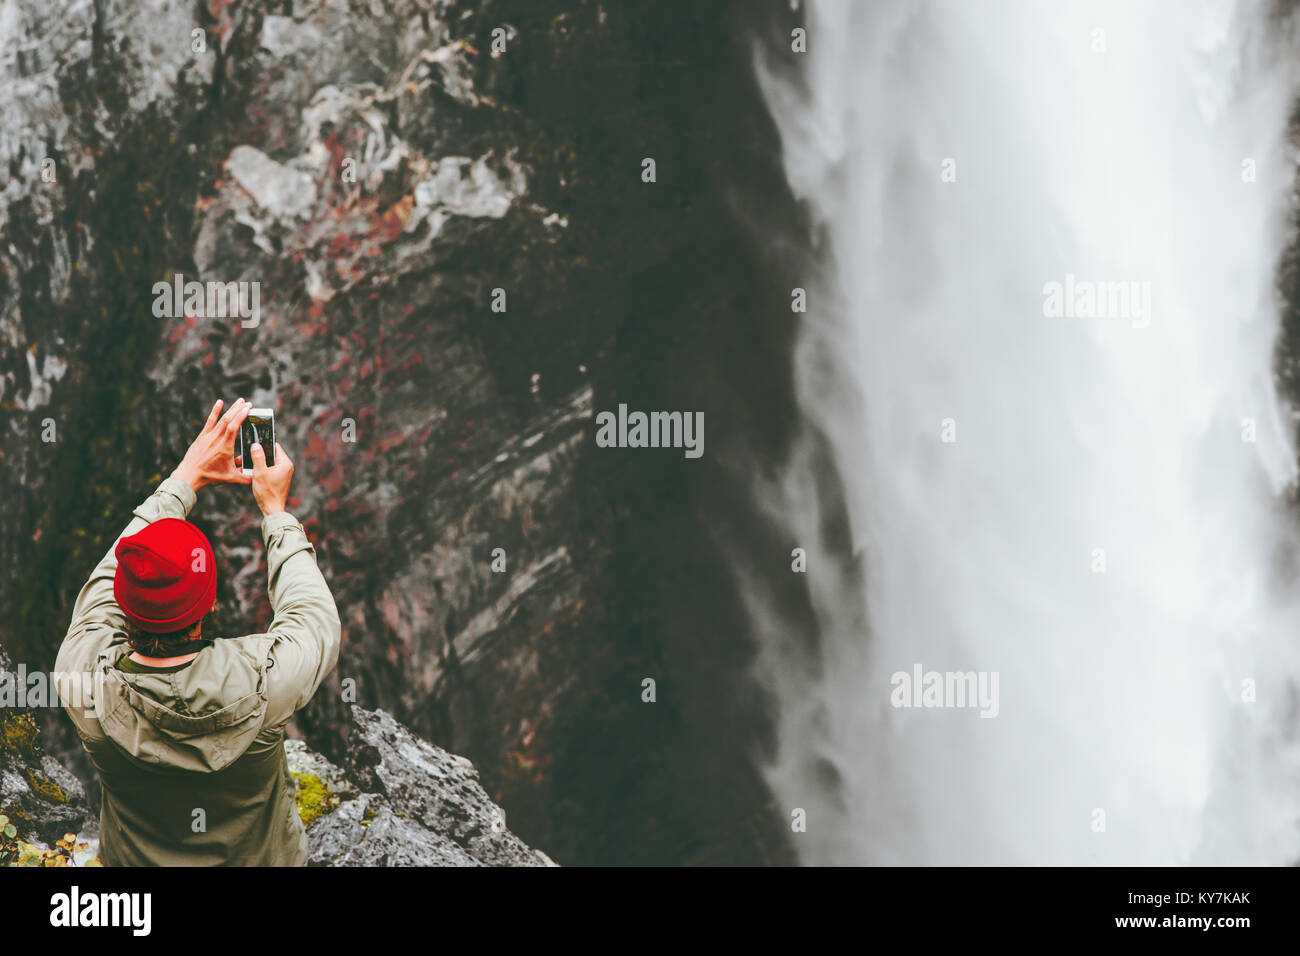 Traveling Man taking photo of Vettisfossen waterfall using smartphone on cliff adventure lifestyle concept extreme vacations outdoor wanderlust Stock Photo